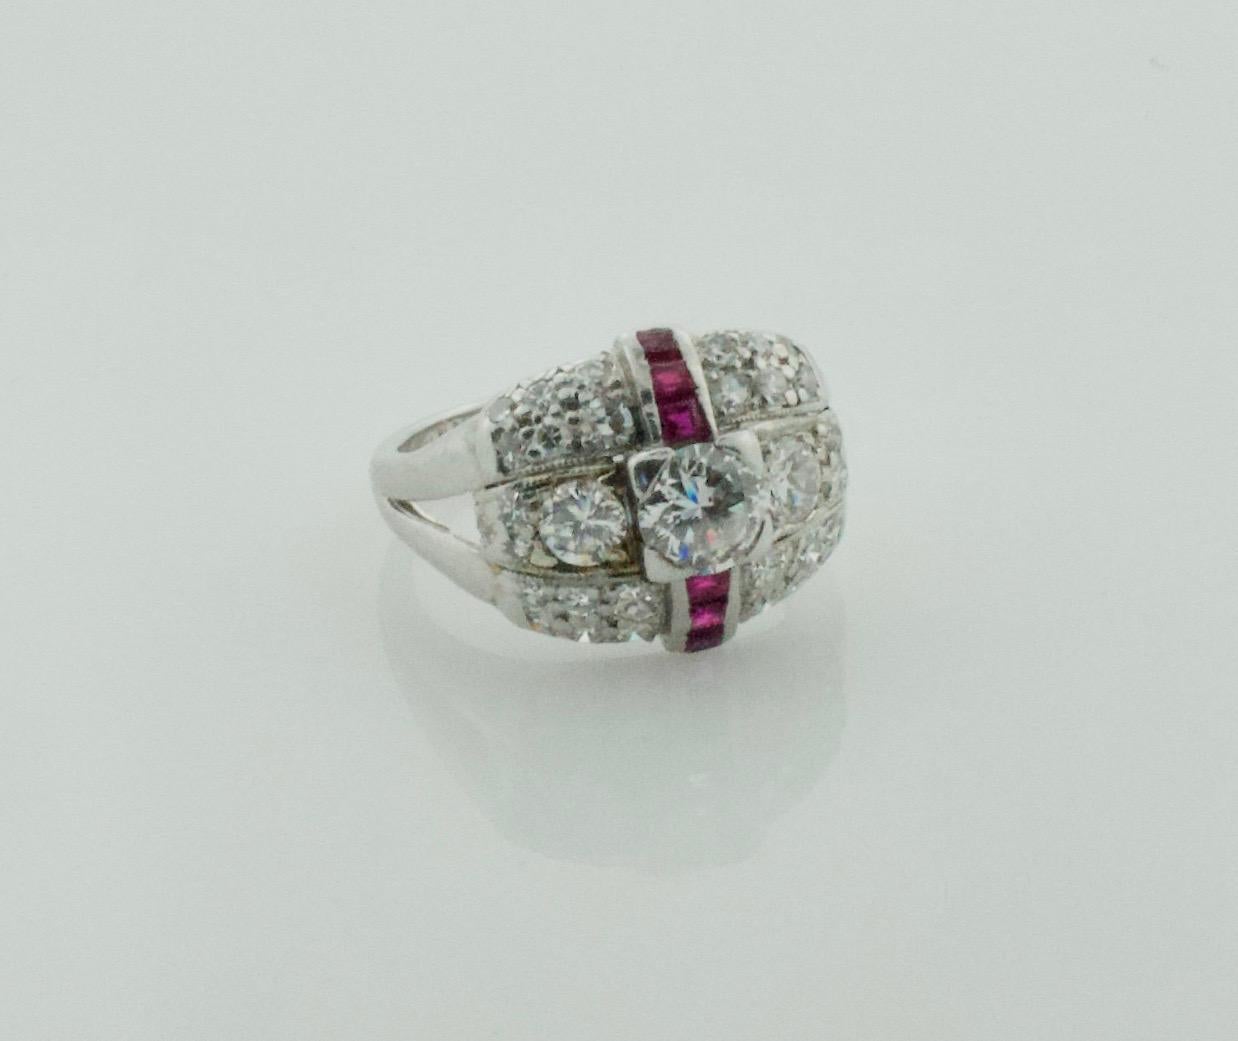 Art Deco Diamond and Ruby Ring in Platinum
One Round Brilliant Cut Diamond weighing .60 carats approximately [H - VS2]
Two Round Brilliant Cut Diamonds weighing .45 carats approximately  [H - VS2]
Thirty Round Single Cut Diamonds weighing .75 carats